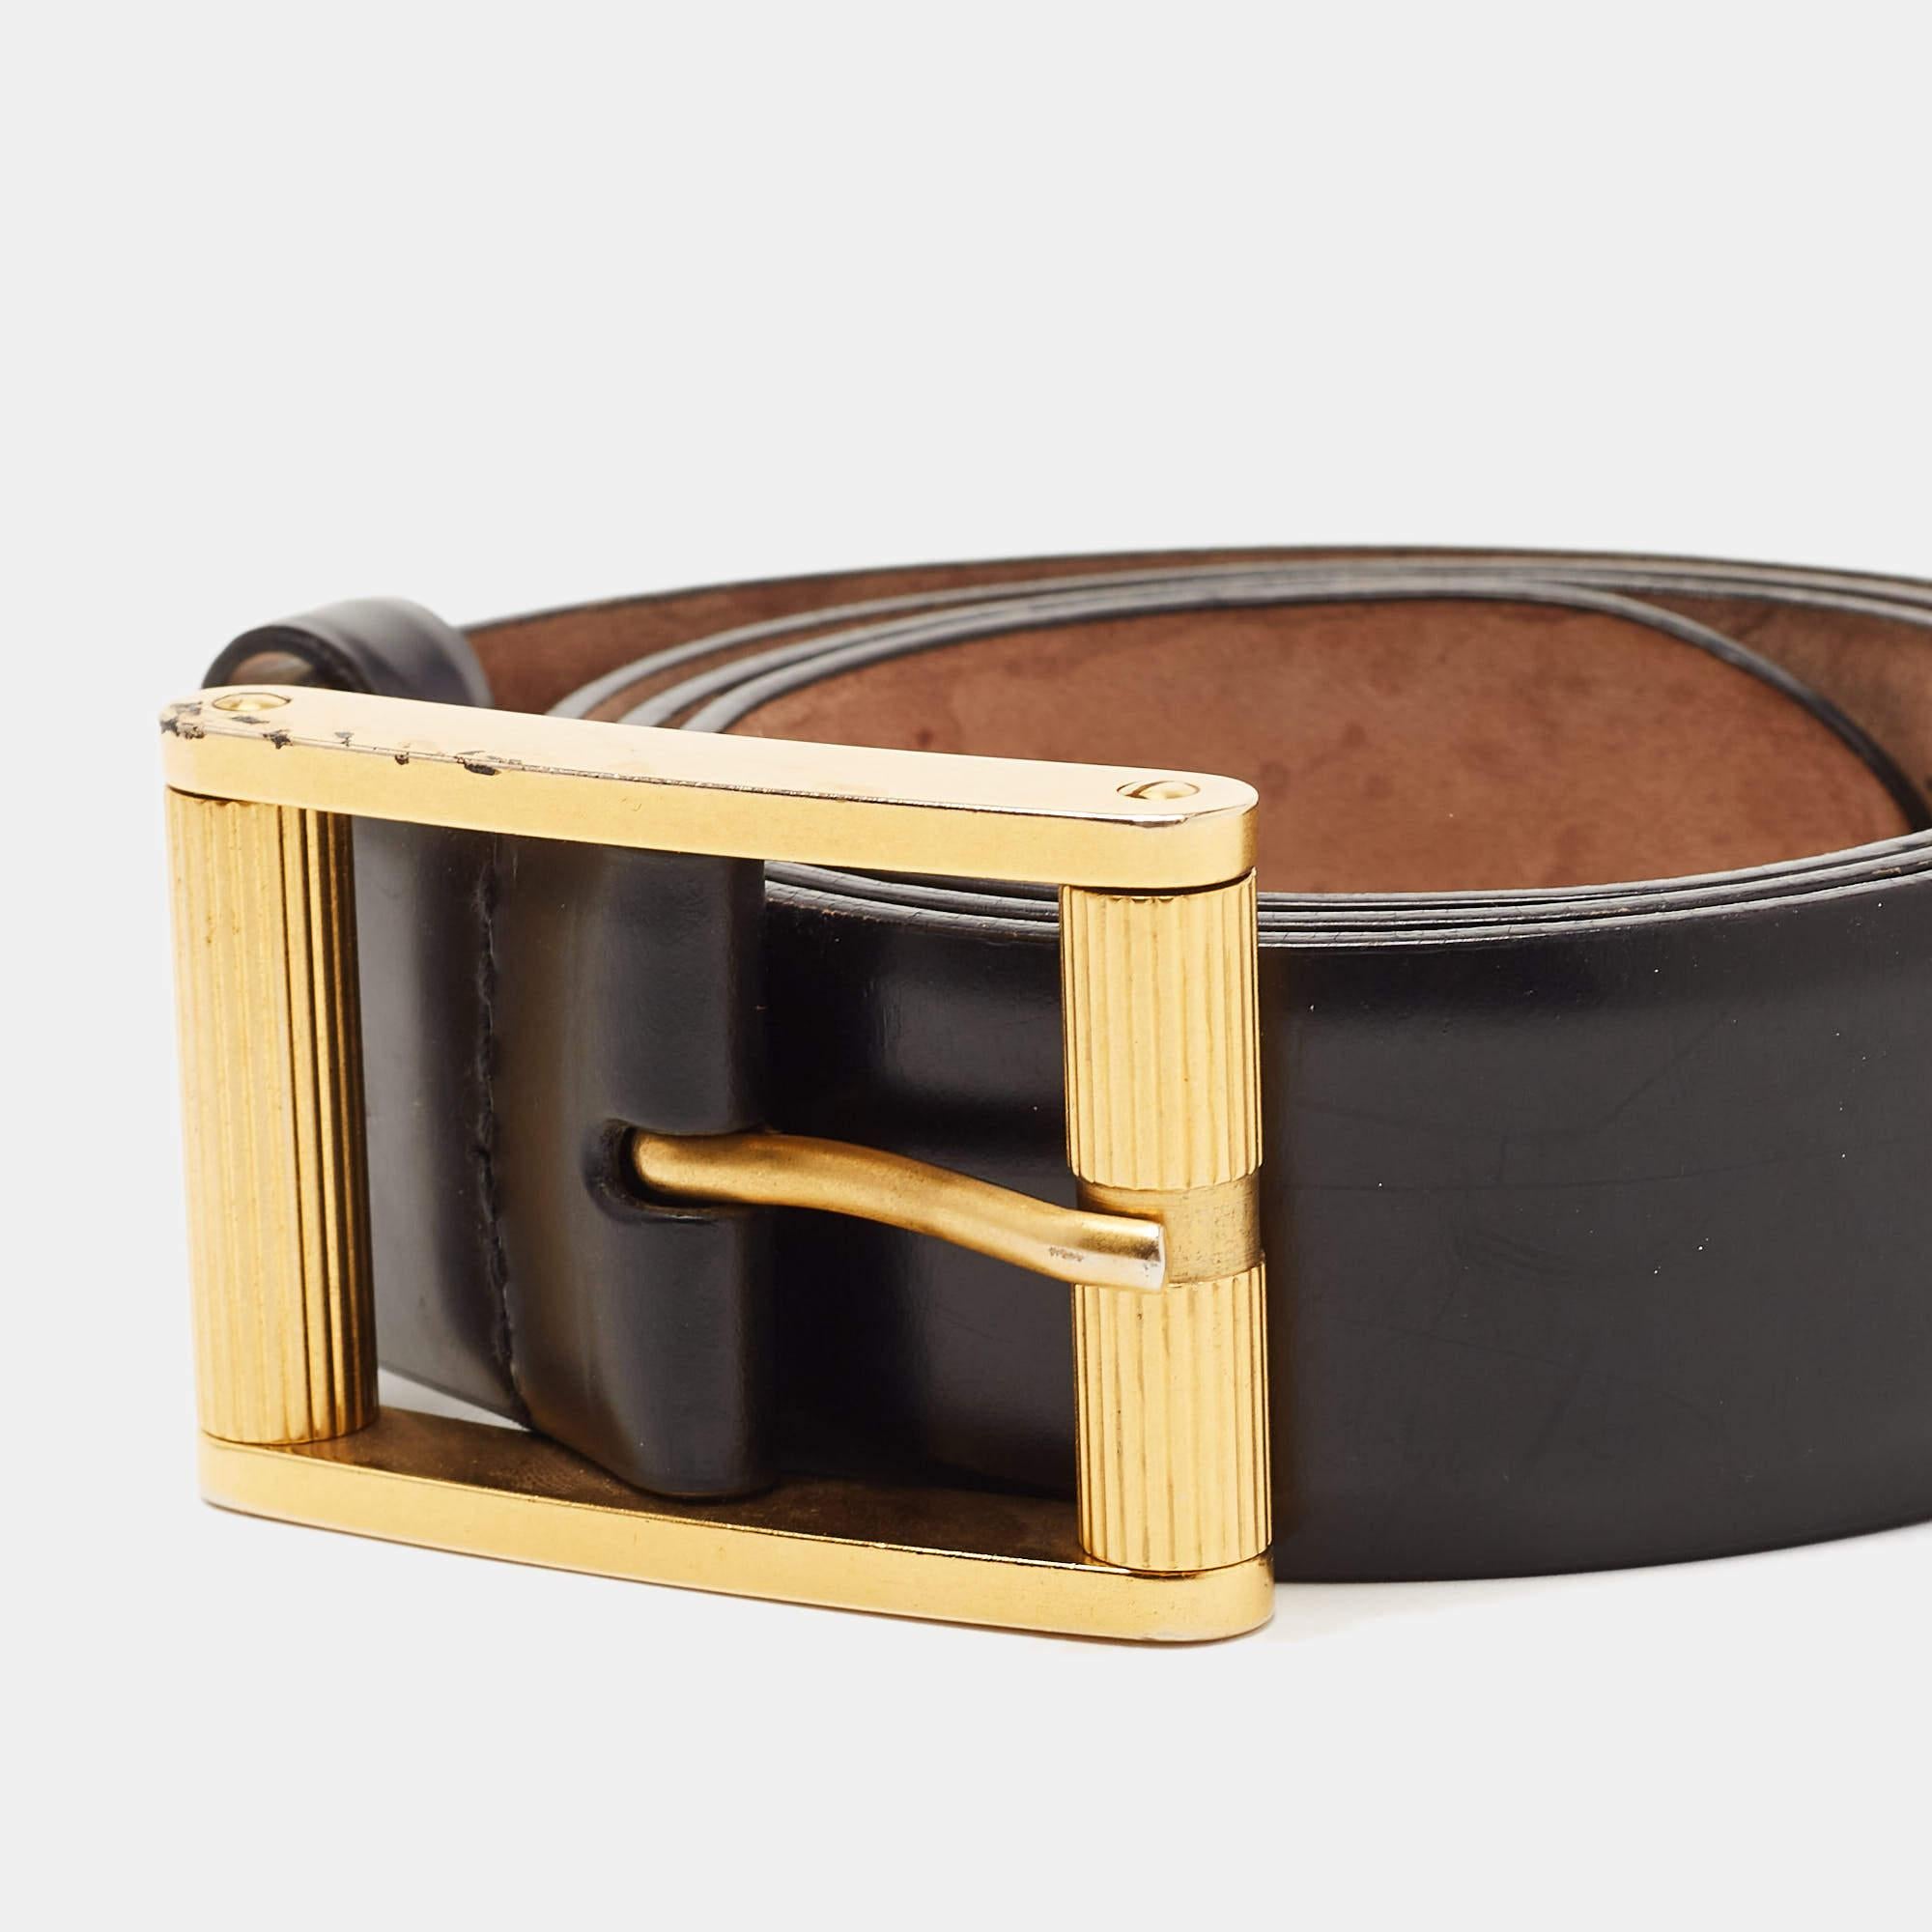 A staple accessory, add this D&G belt to your classic collection today. This durable belt is crafted from black leather and is completed with a slender gold-tone pin buckle.

